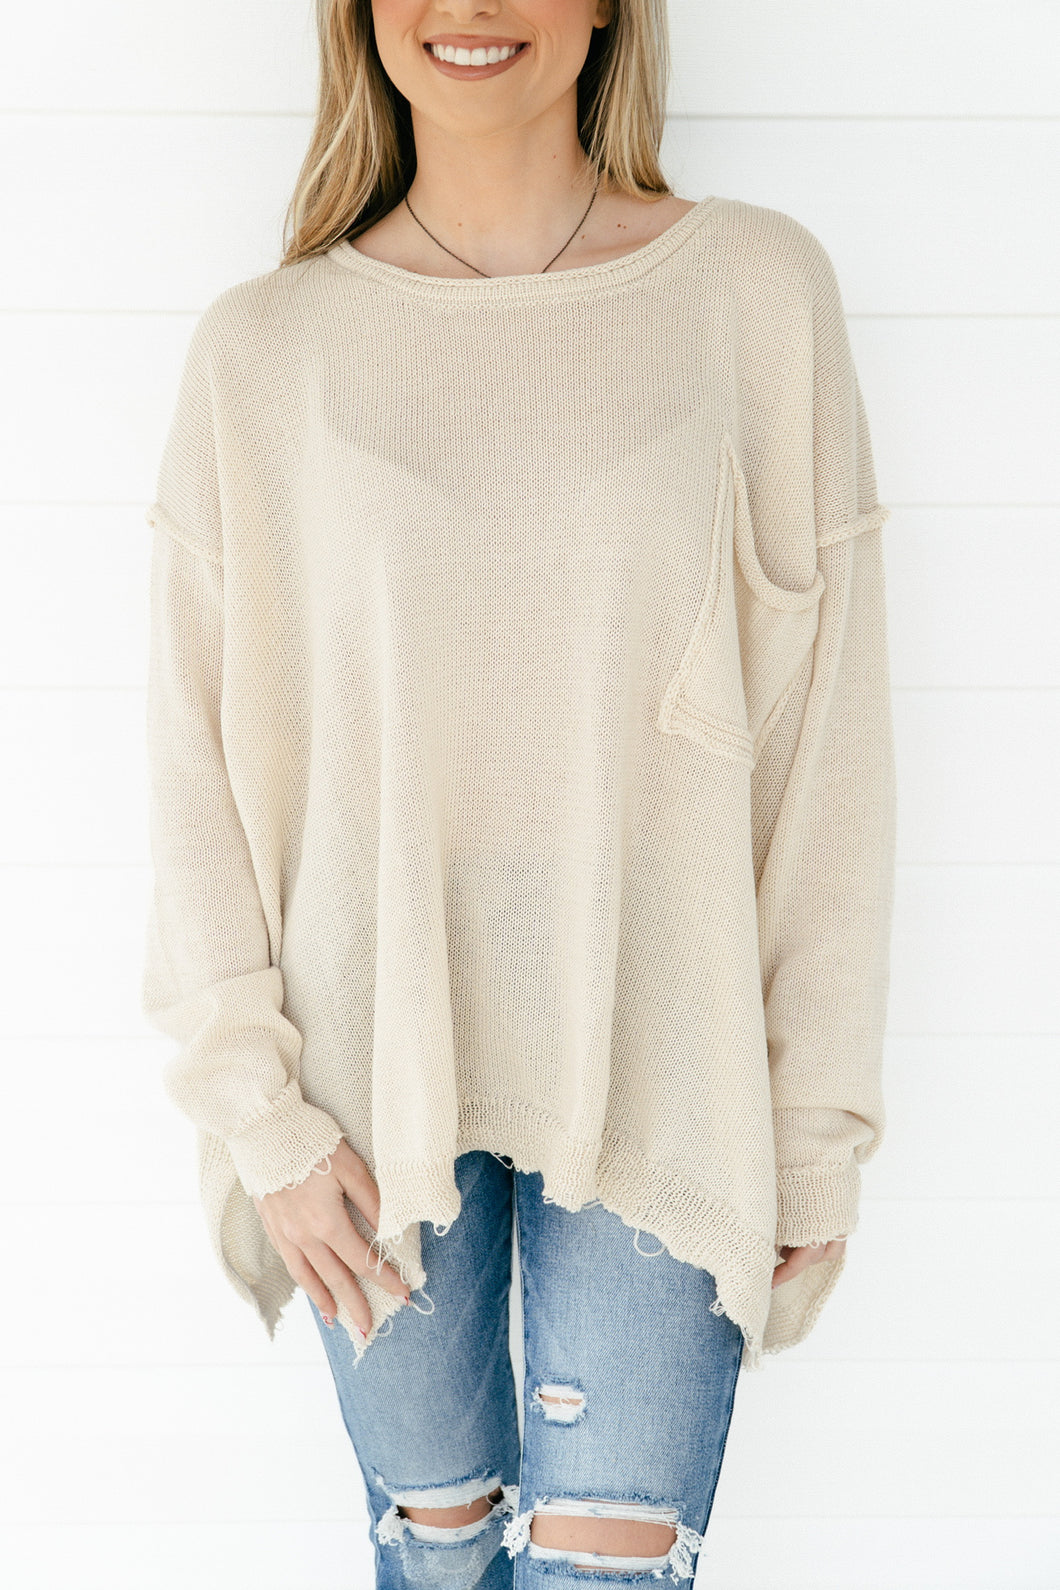 Coming In Hot Lightweight Sweater - Oatmeal